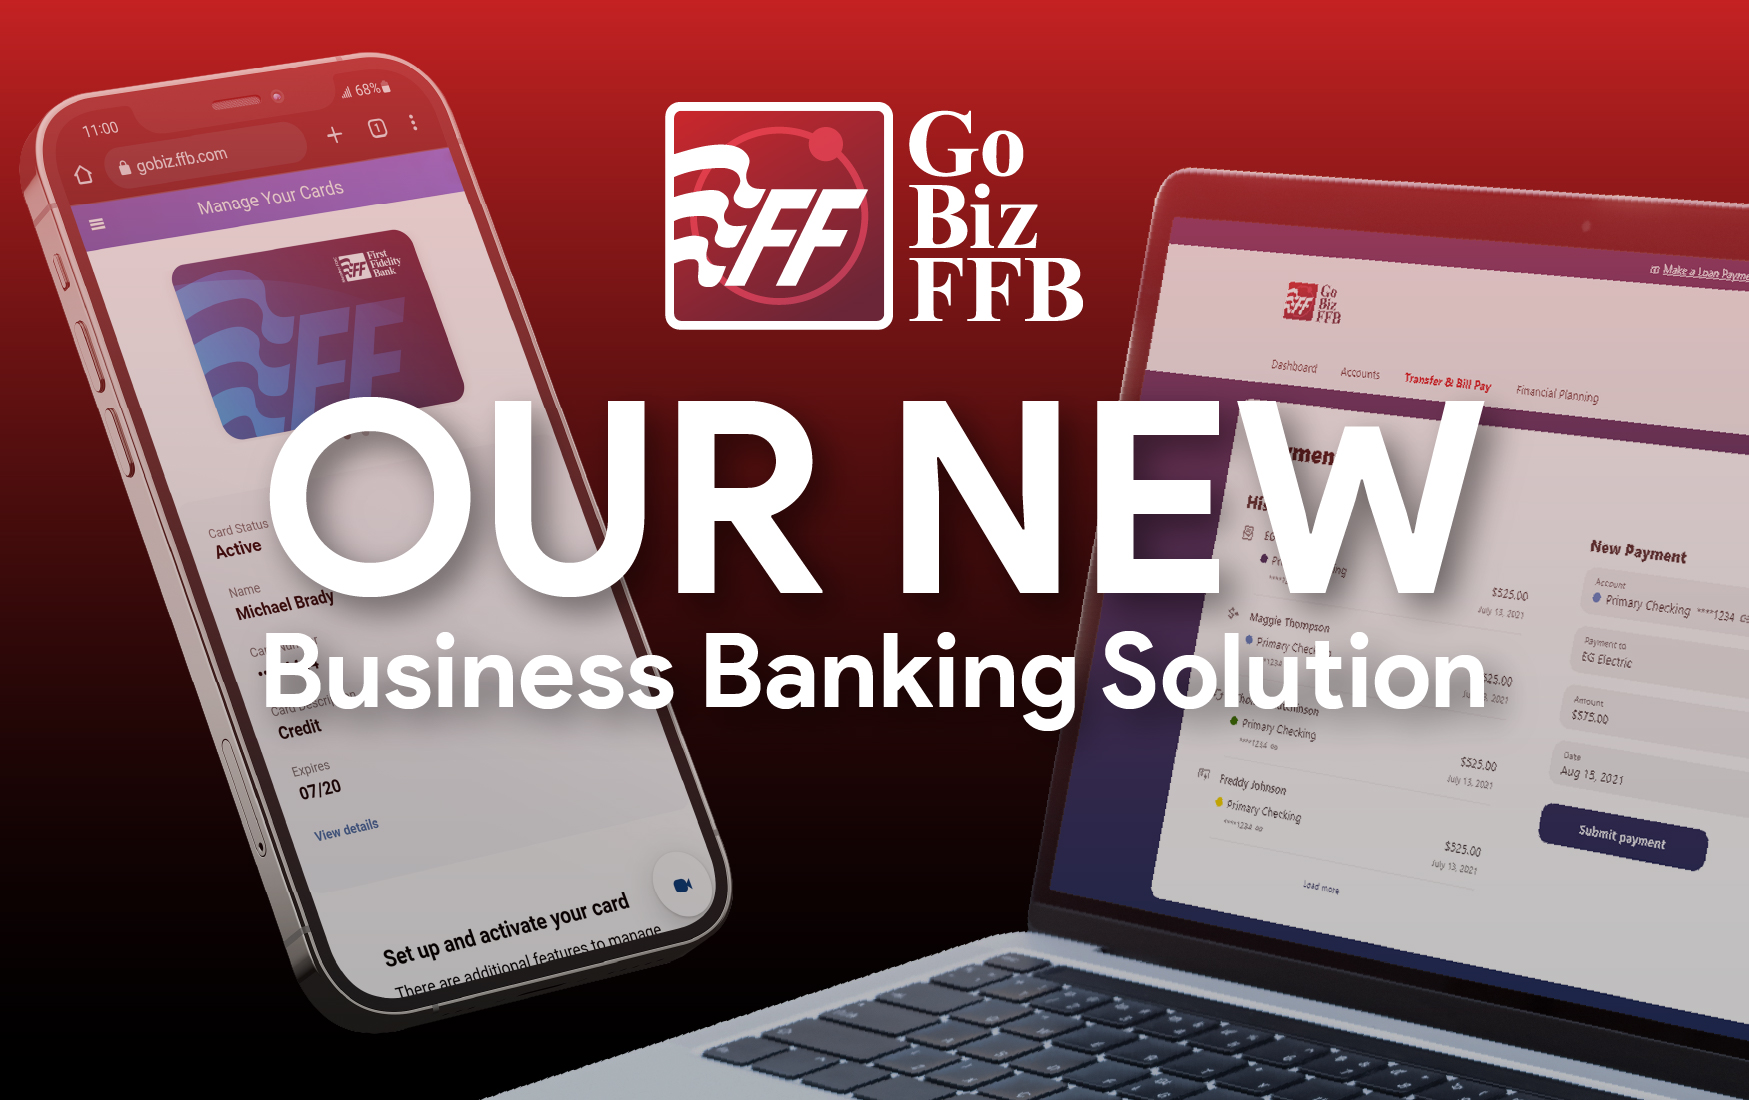 GoBizFFB - Our new business banking solution